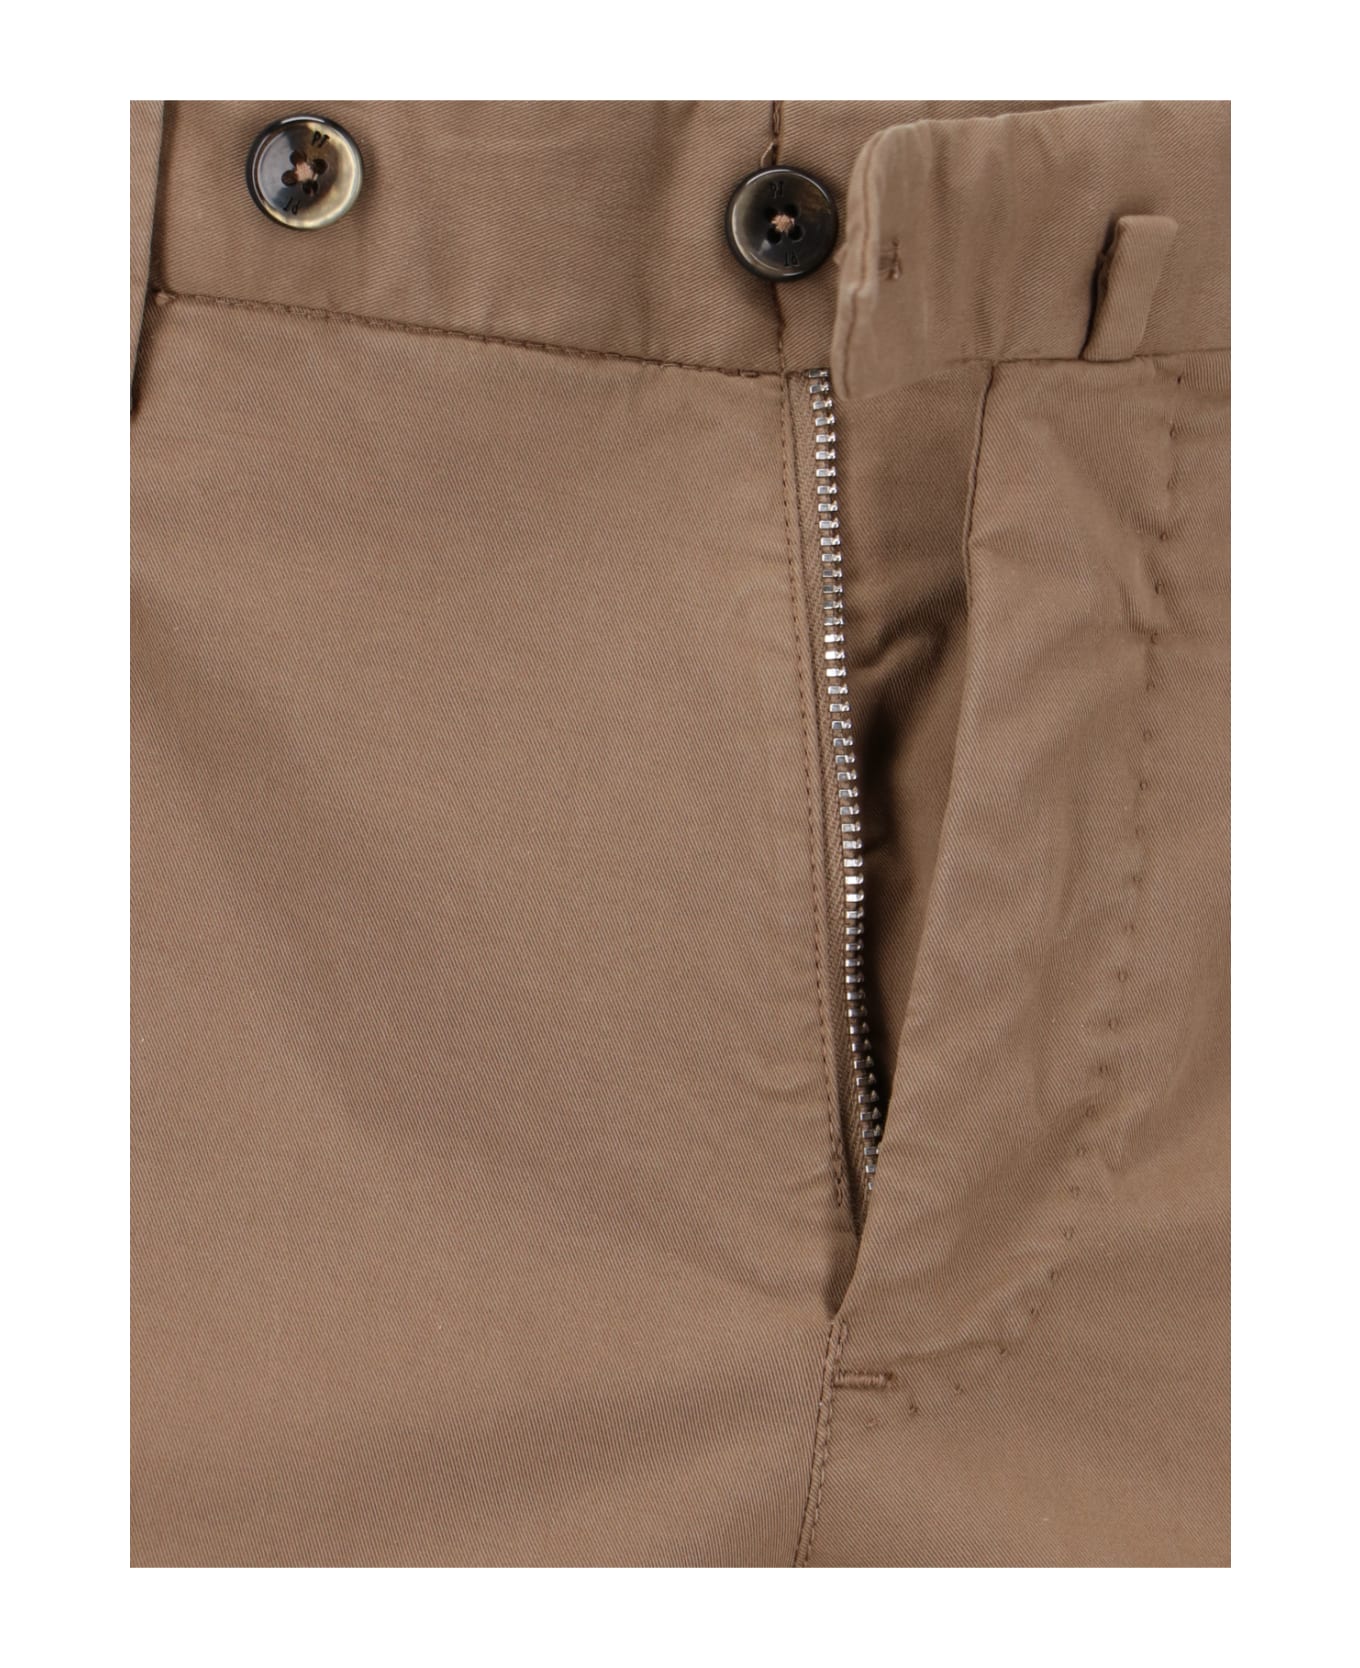 PT Torino Straight Trousers - Brown